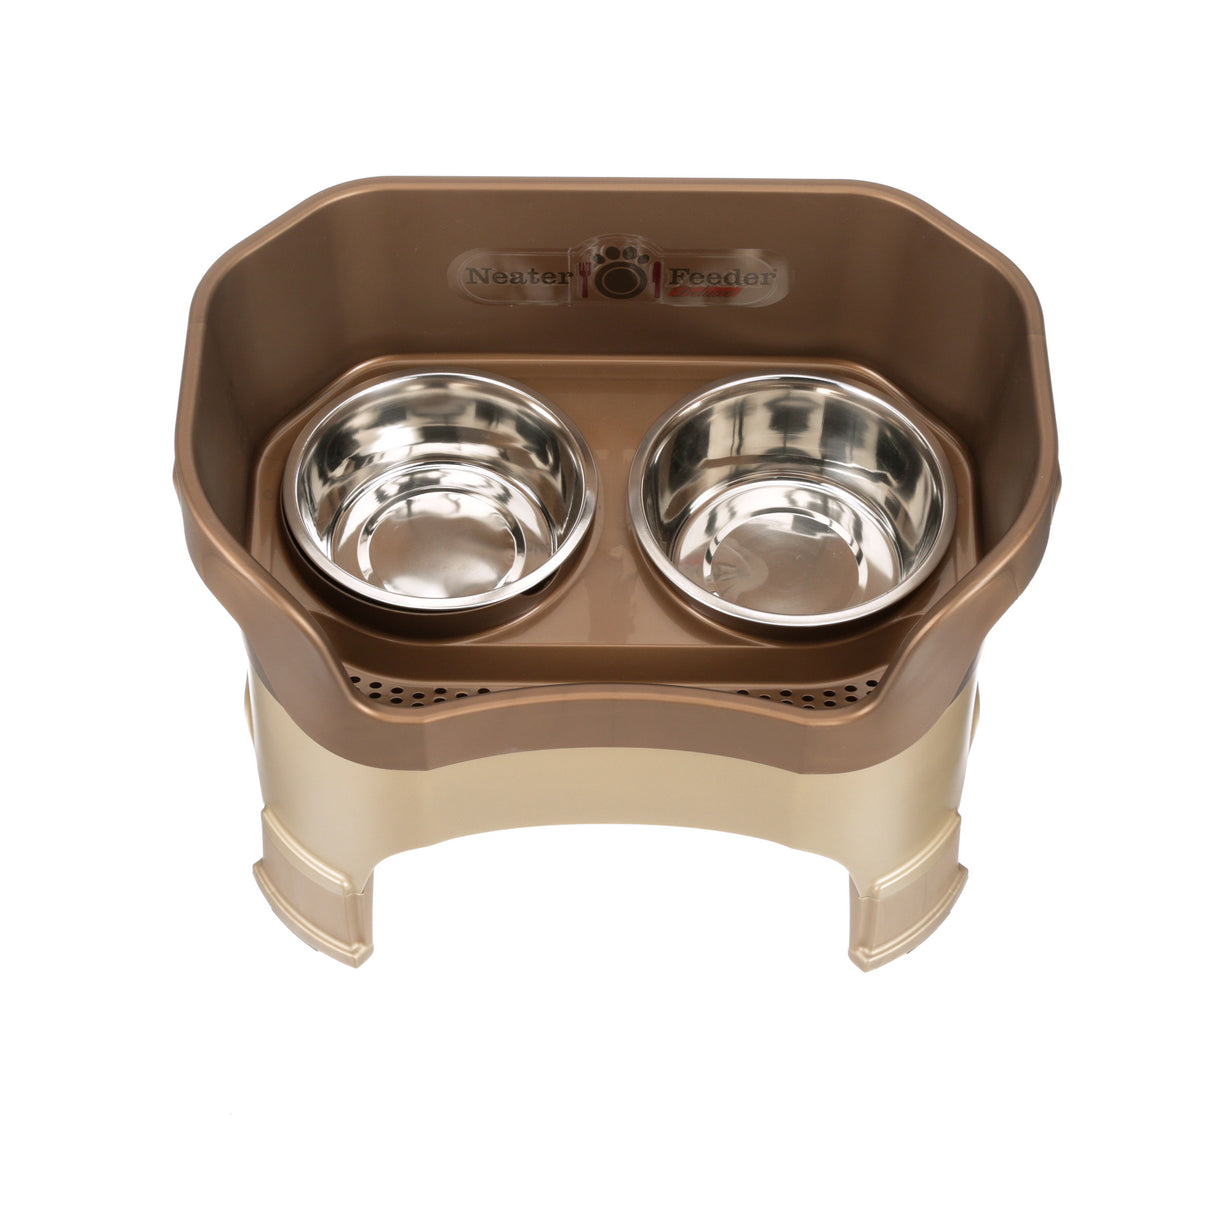 Deluxe large Neater Feeder in Bronze with leg extensions